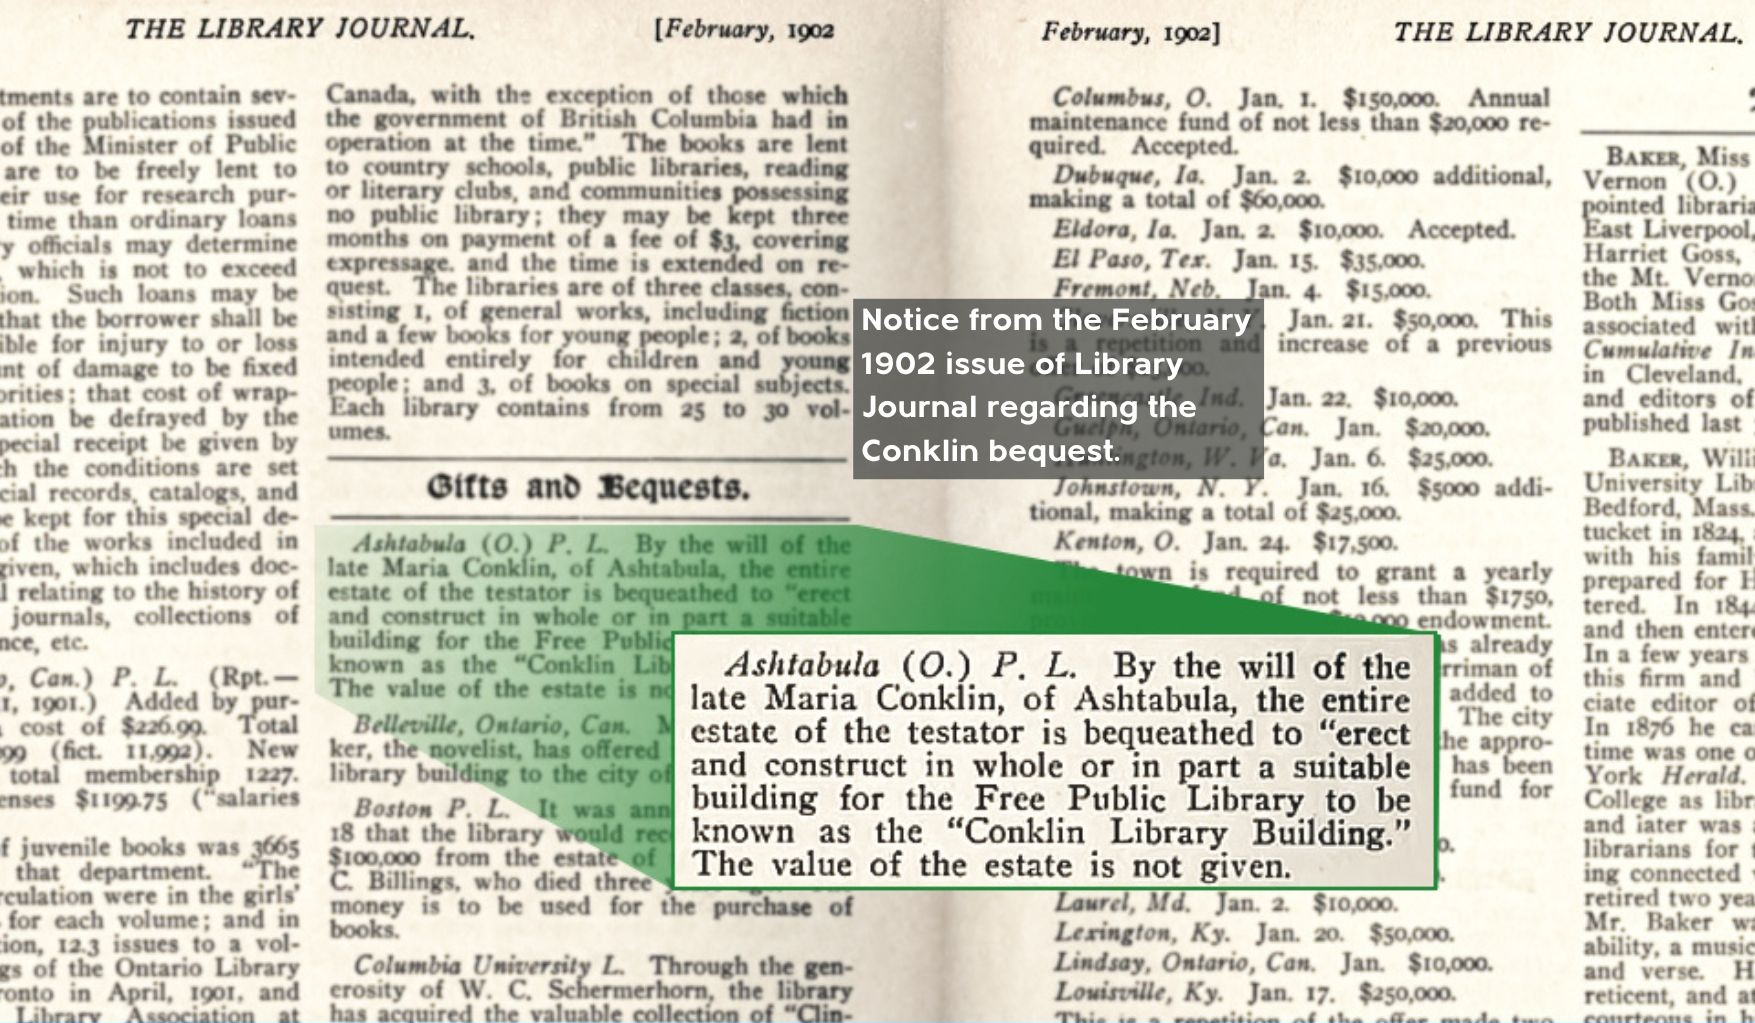 Notice from the February 1902 issue of Library Journal regarding the Conklin bequest. It reads: "Ashtabula (O.) P..L. By the will of the late Maria Conklin, of Ashtabula, the entire estate of the testator is bequeathed to "erect and construct in whole or in part a suitable building for the Free Public Library to be known as the Conklin Library Building." The value of the estate is not given.